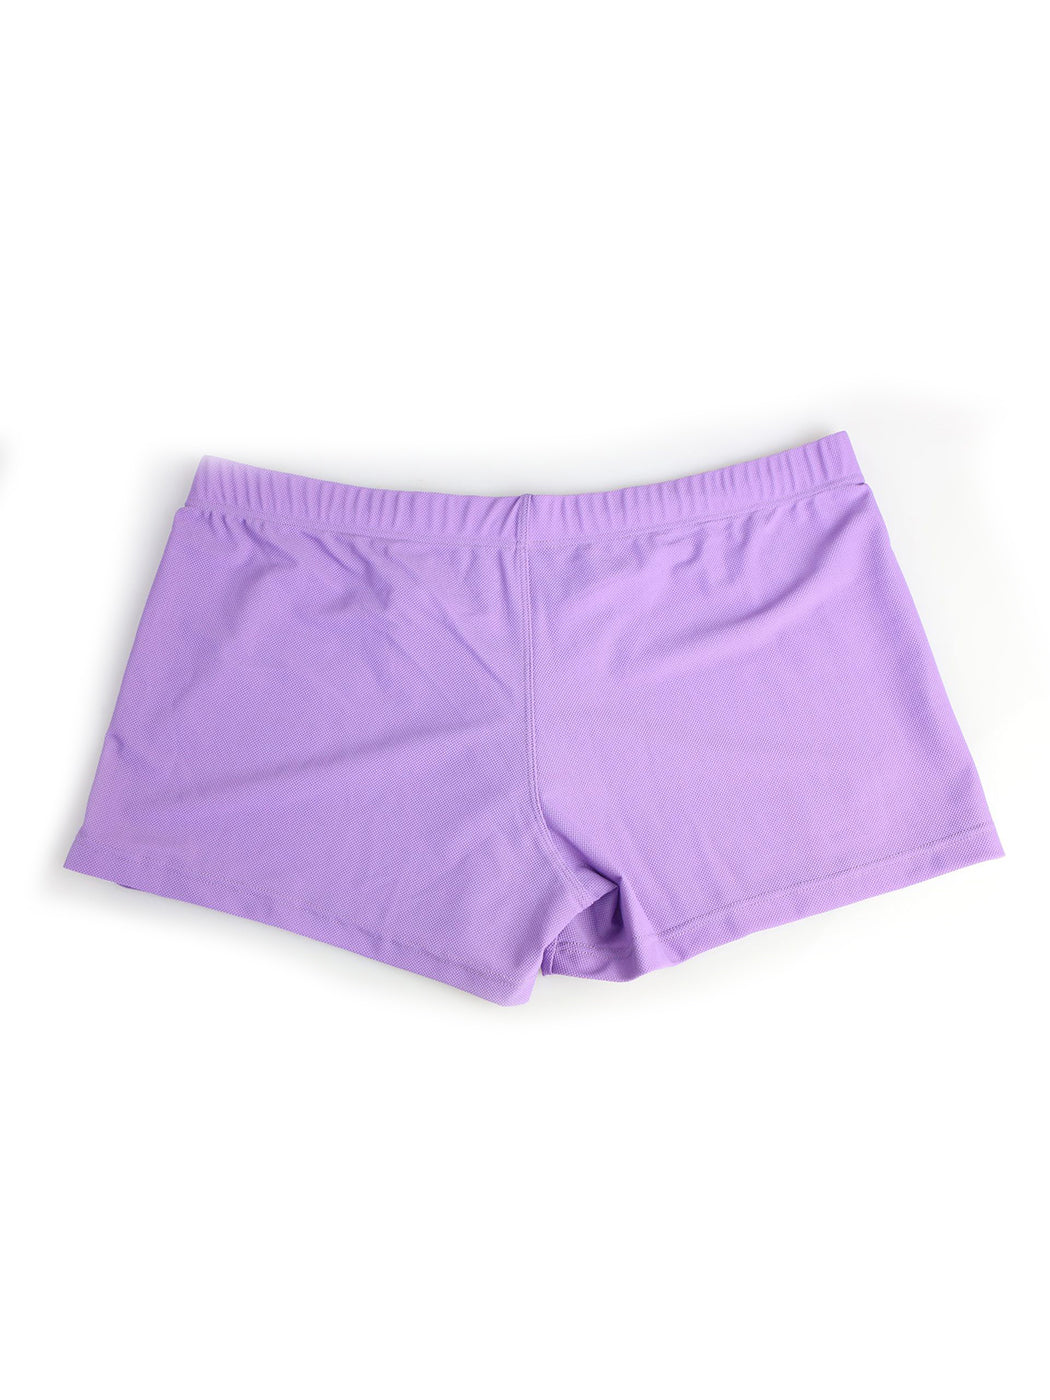 Men’s Shorts With Separate Pockets